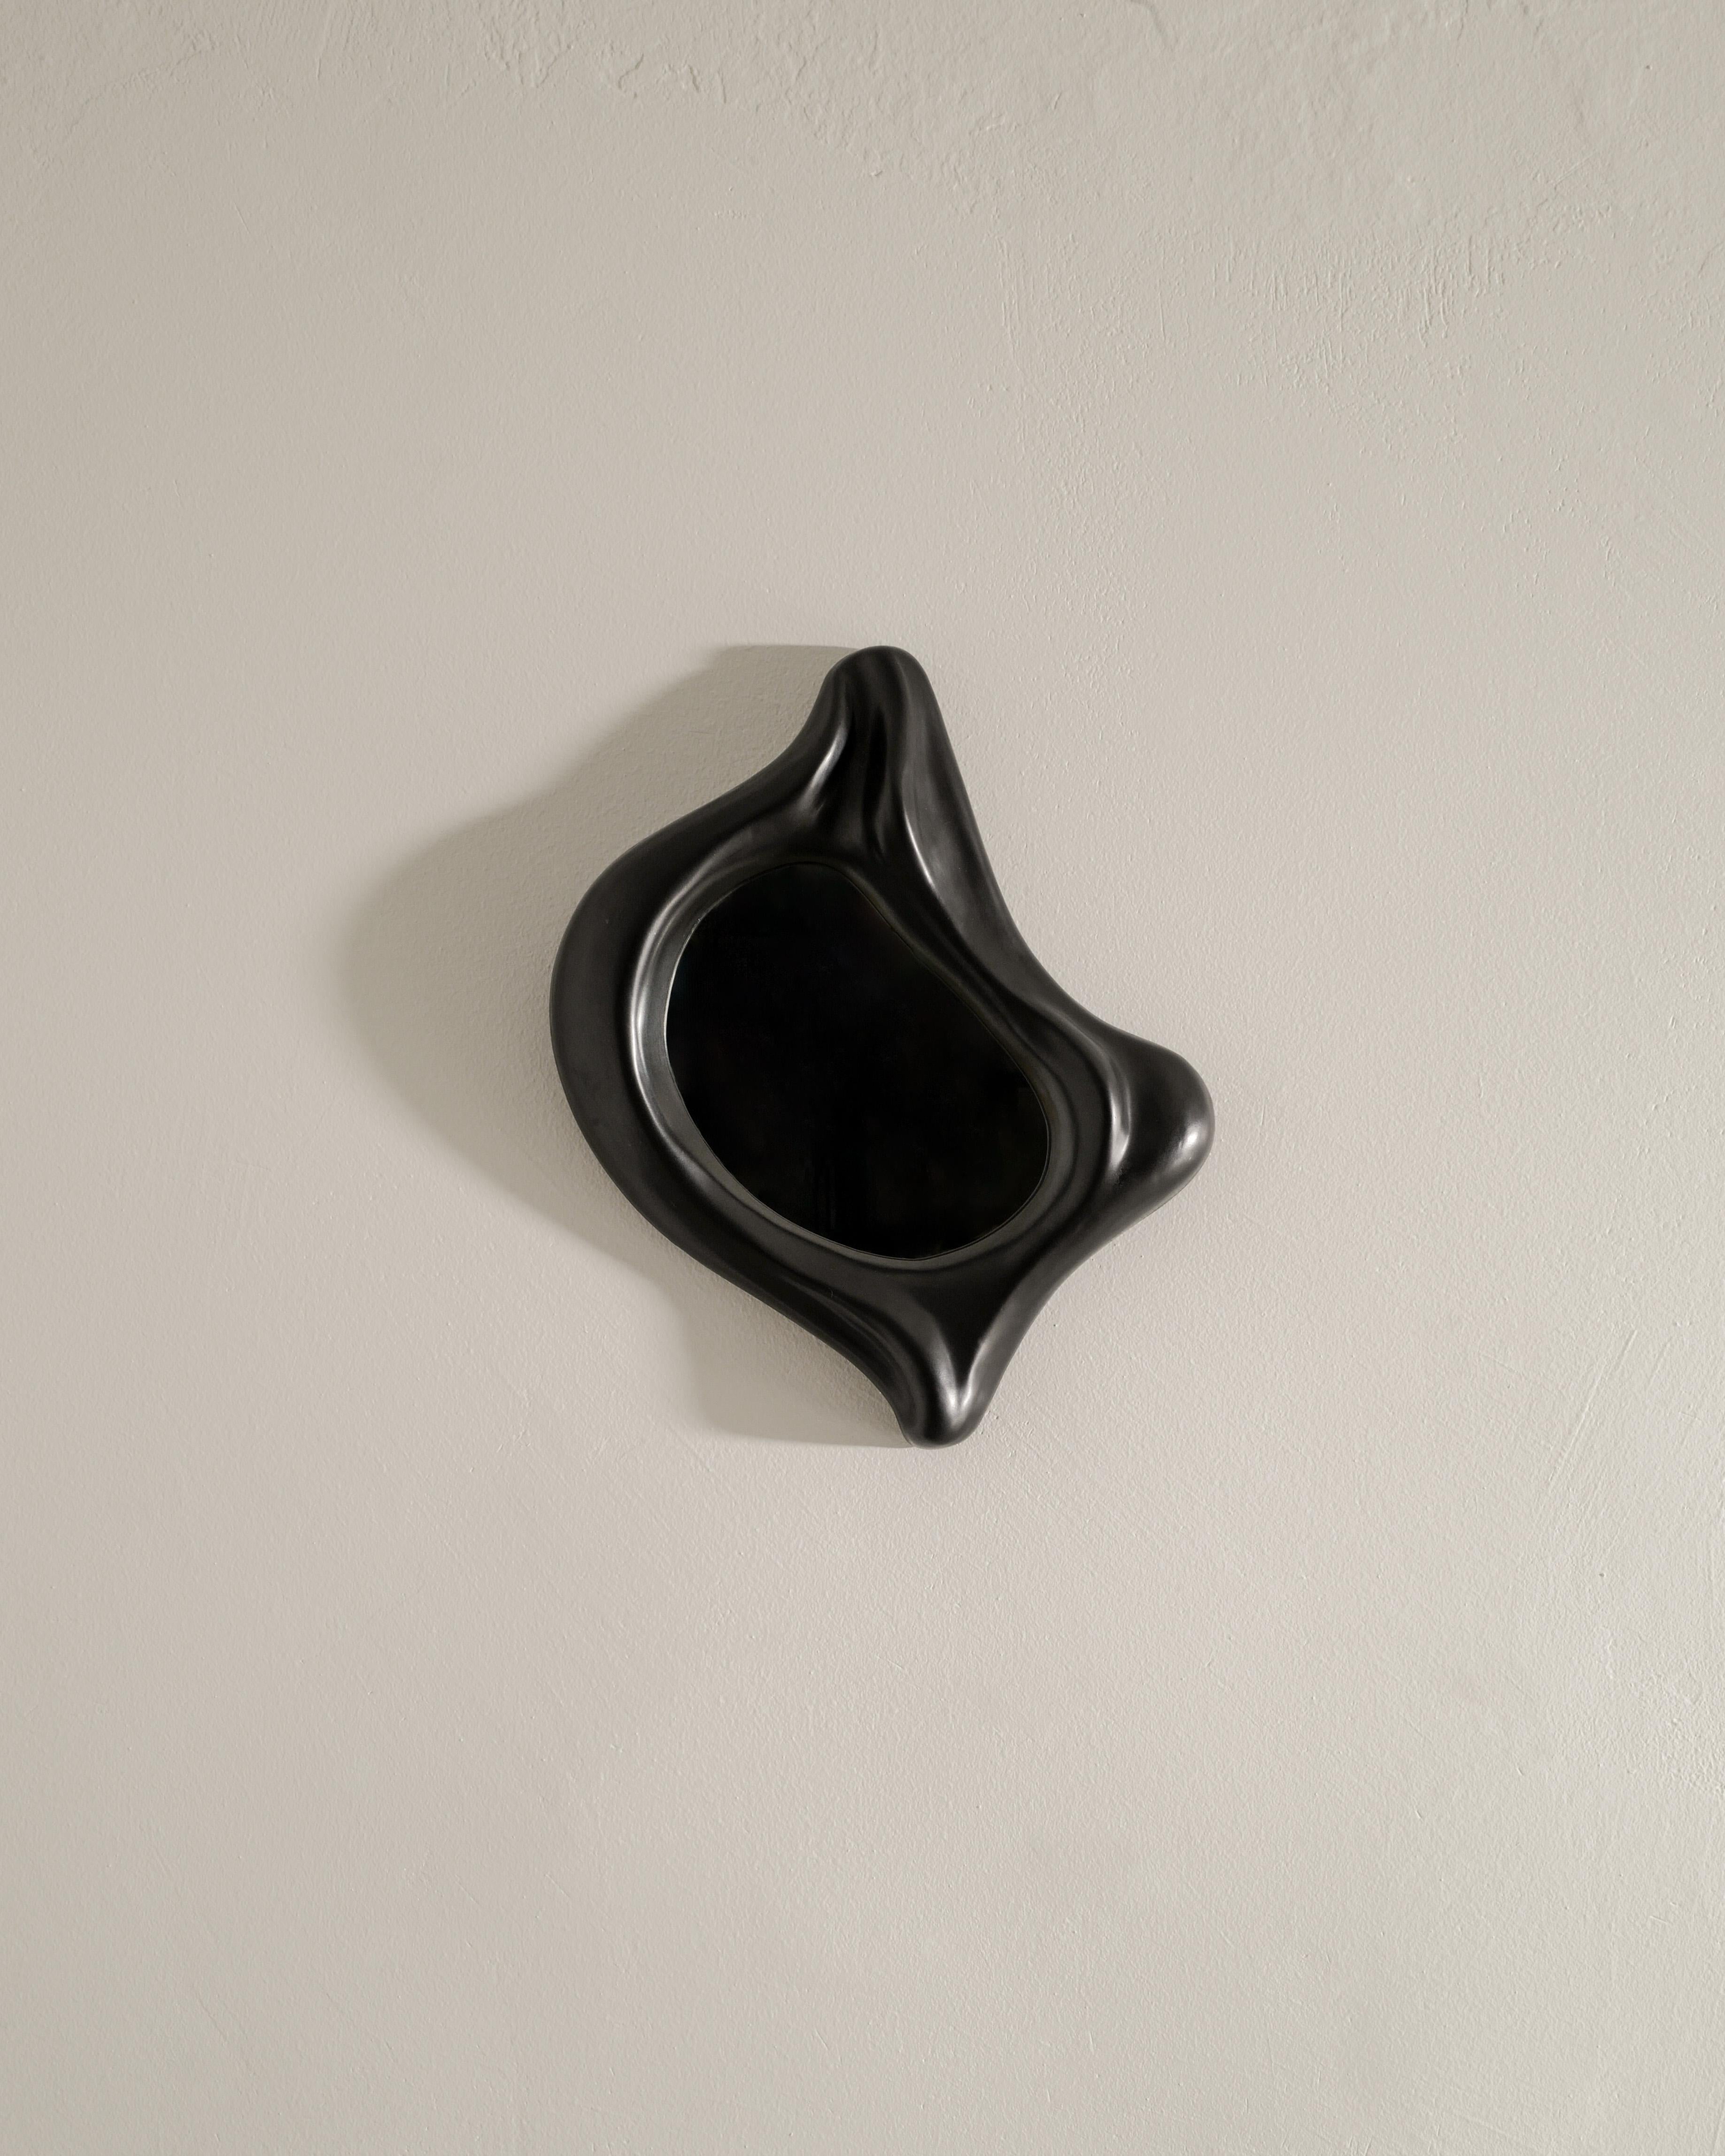 Rare black mid century ceramic free form wall mirror in style of Georges Jouve produced in France 1960s. In good original condition. 
There are two holes diagonal to each other on the back side which makes it adjustable to hang in all directions.